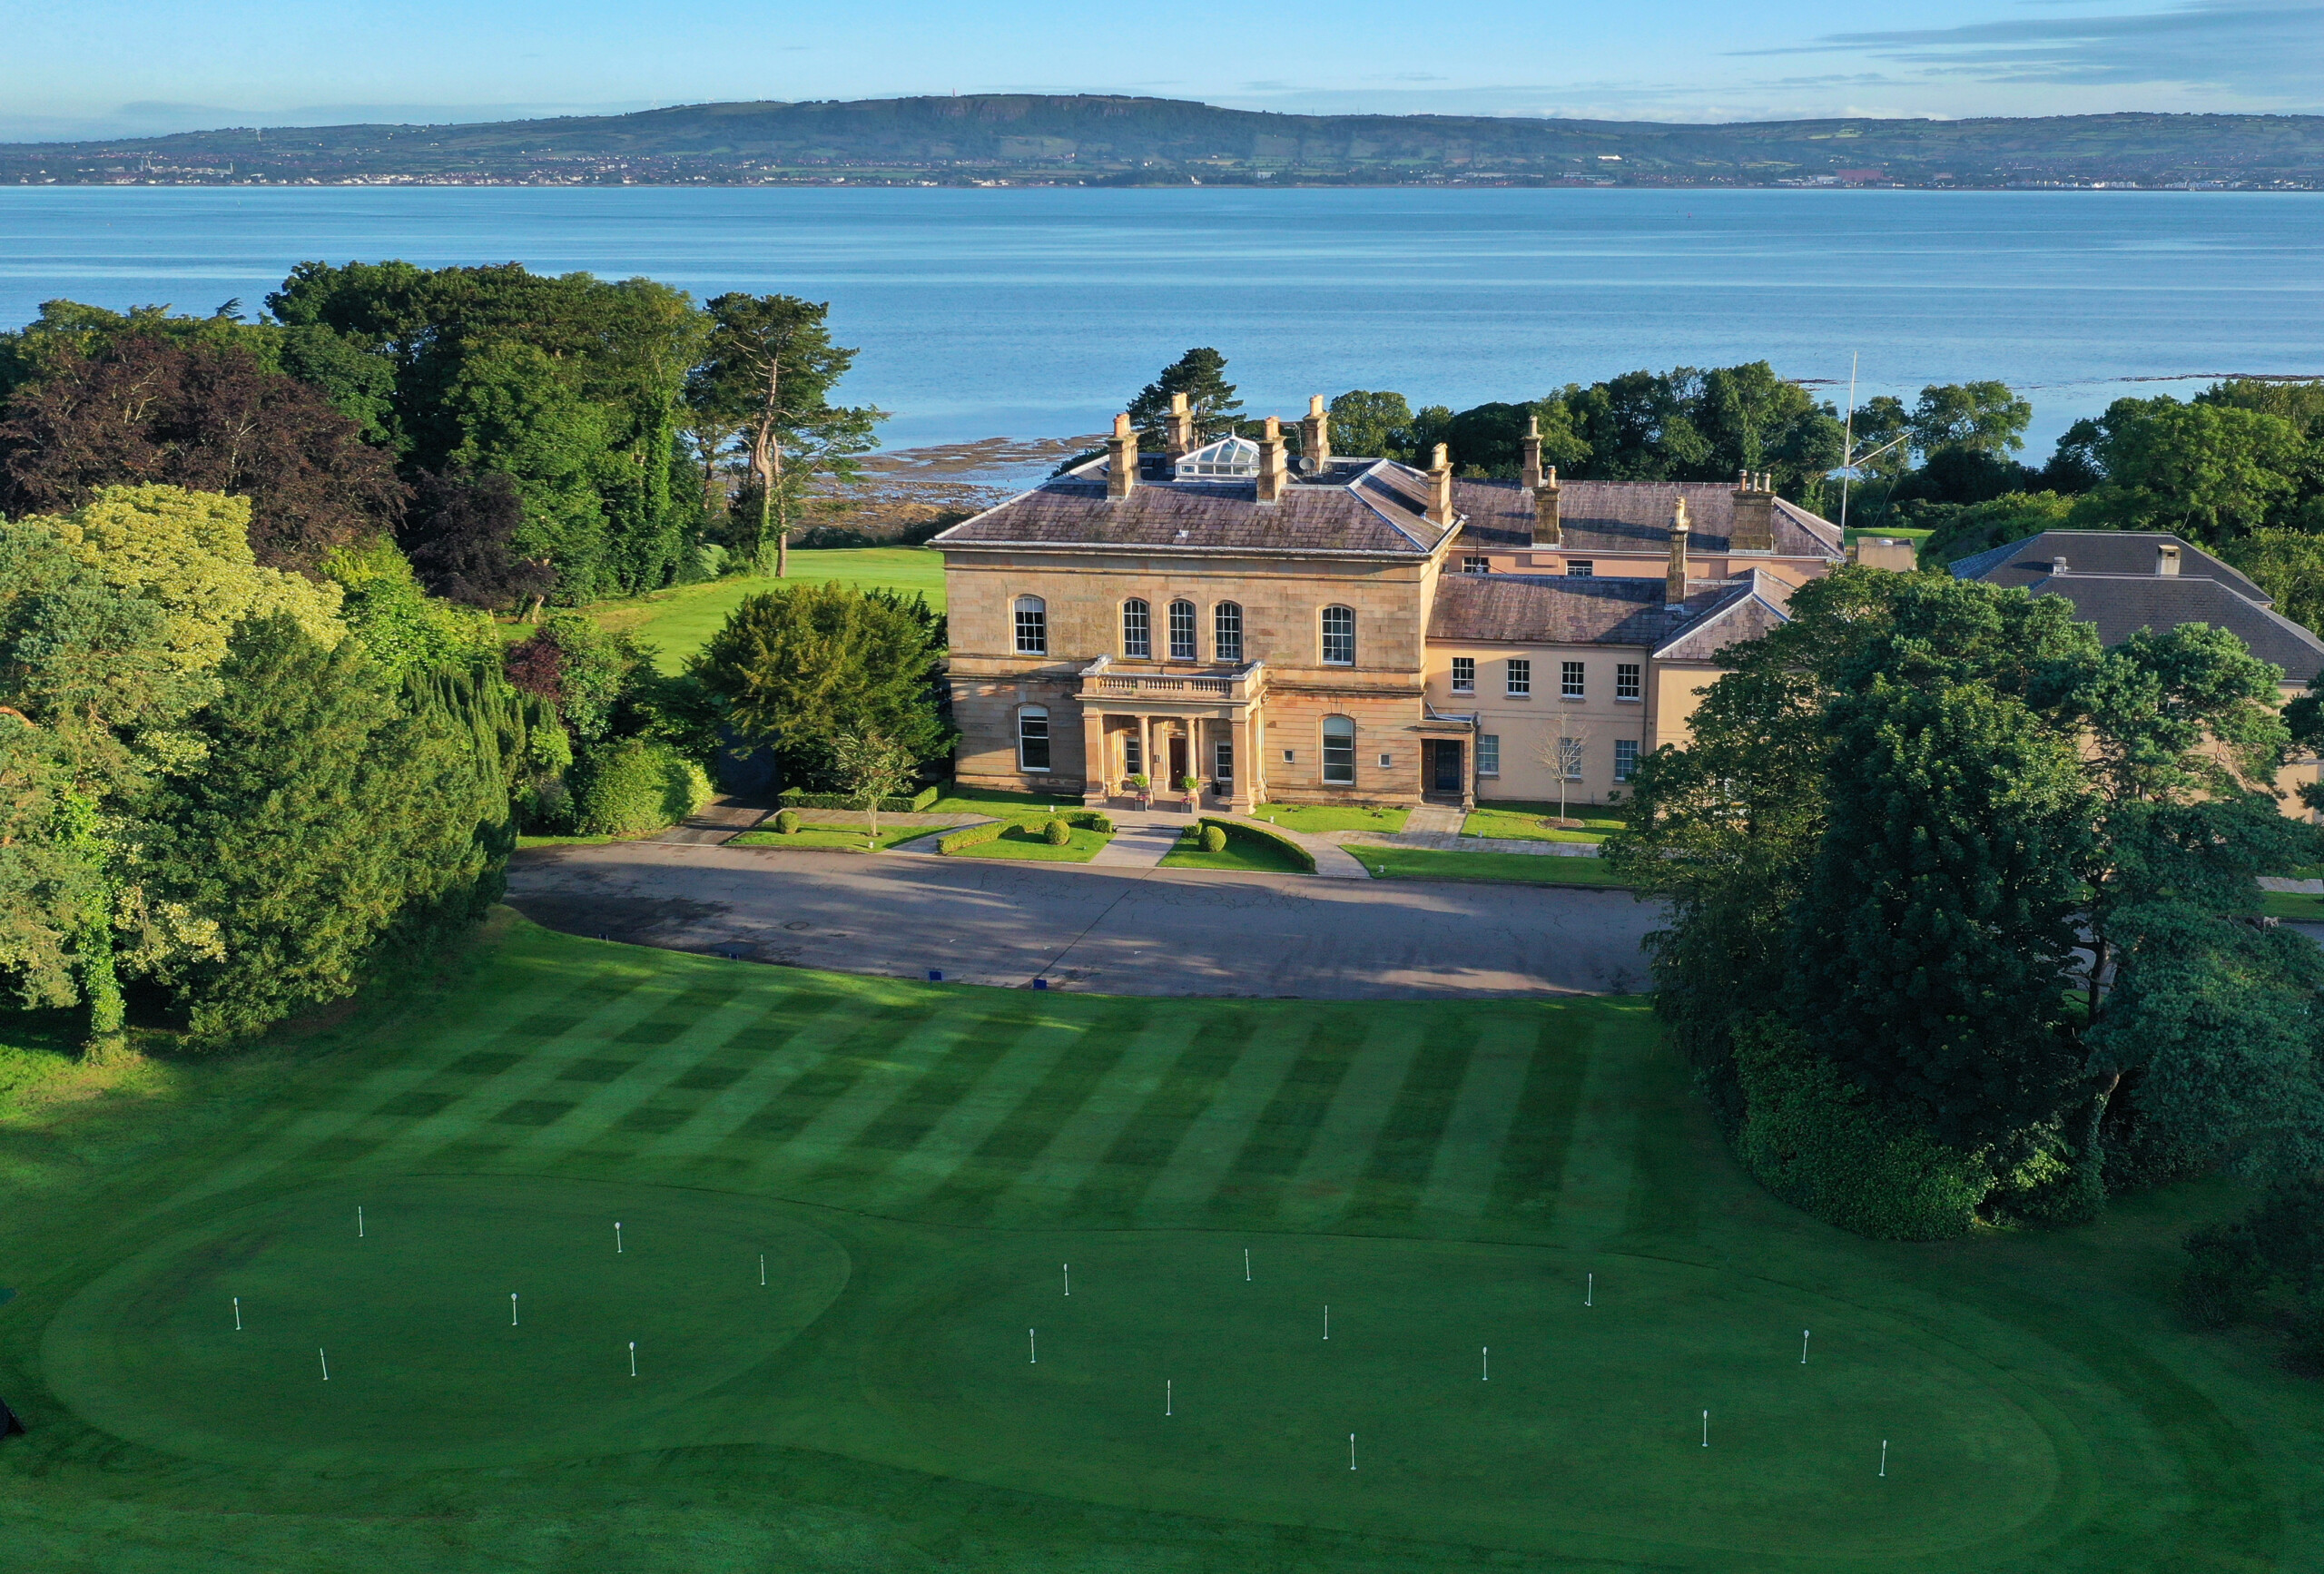 the royal belfast golf club clubhouse surrounded by trees with belfast lough behind it